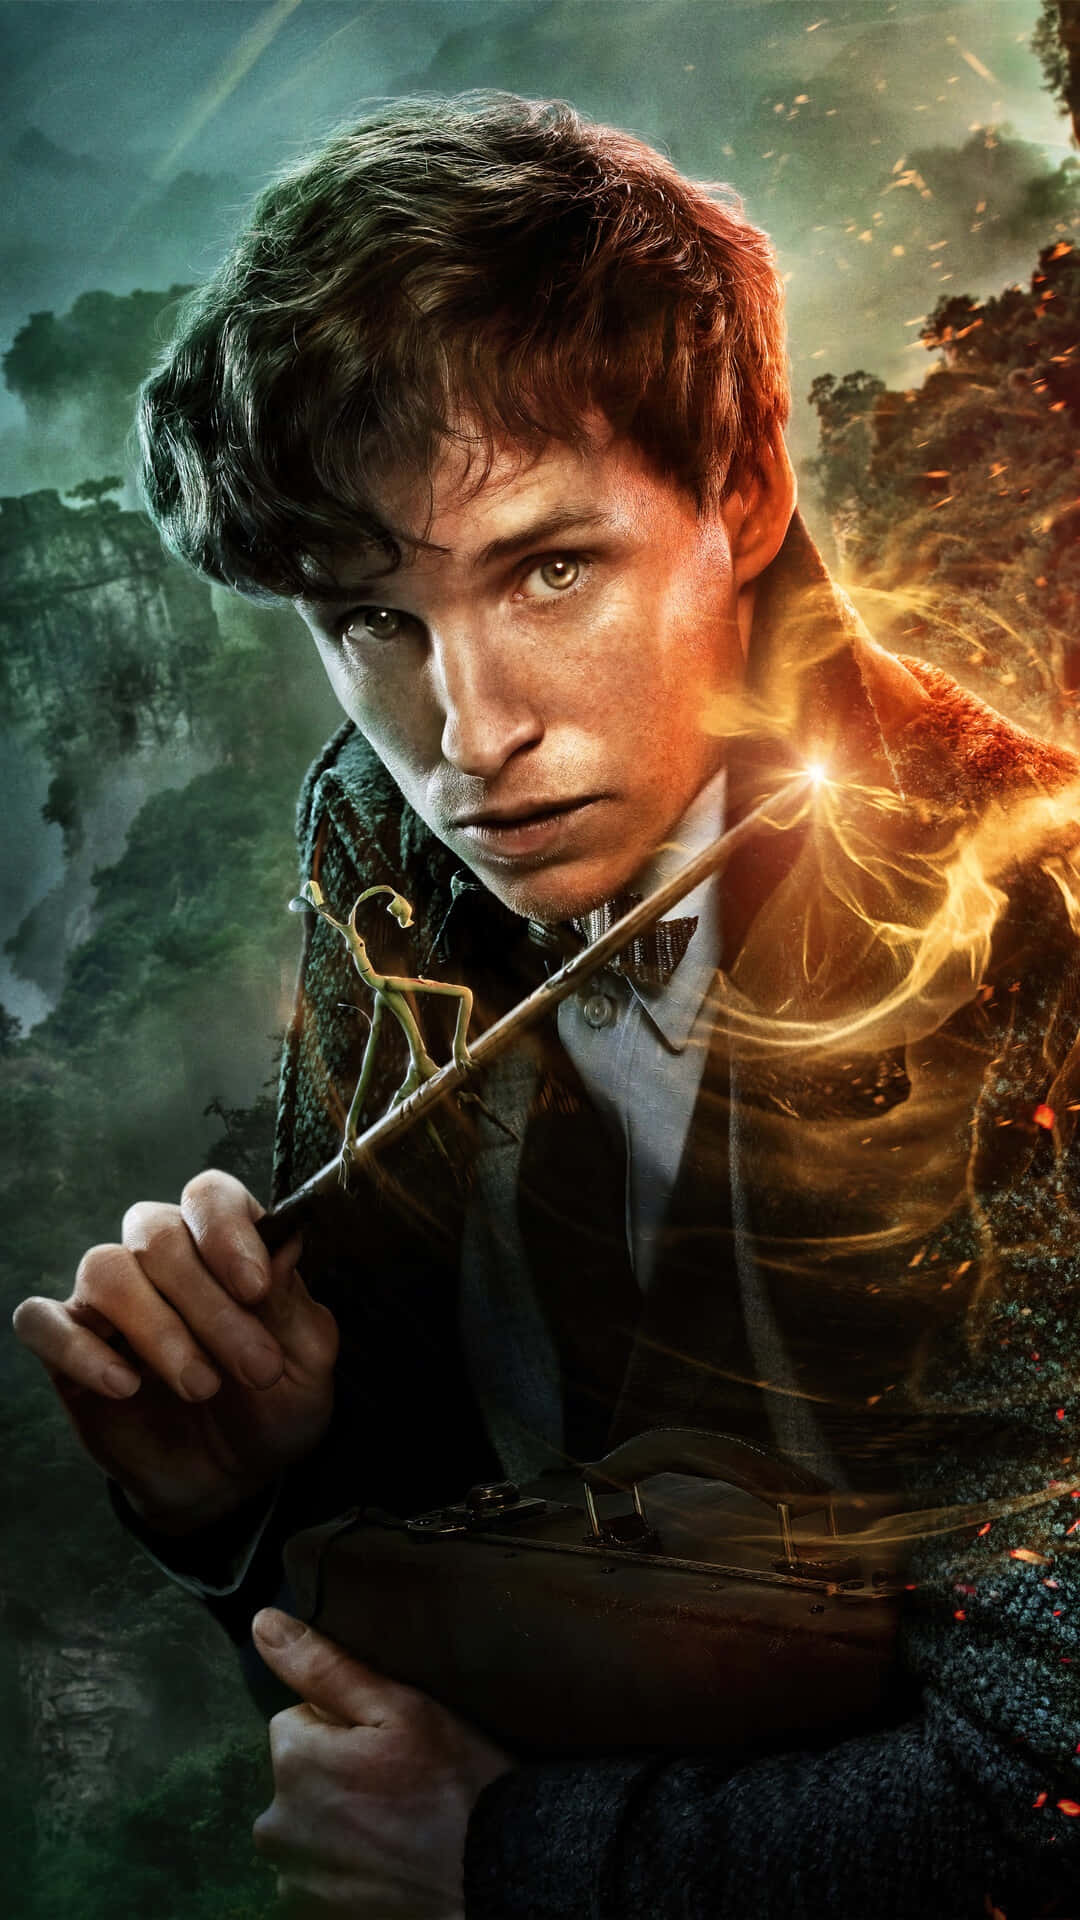 Newt Scamander with magical creatures in Fantastic Beasts Wallpaper